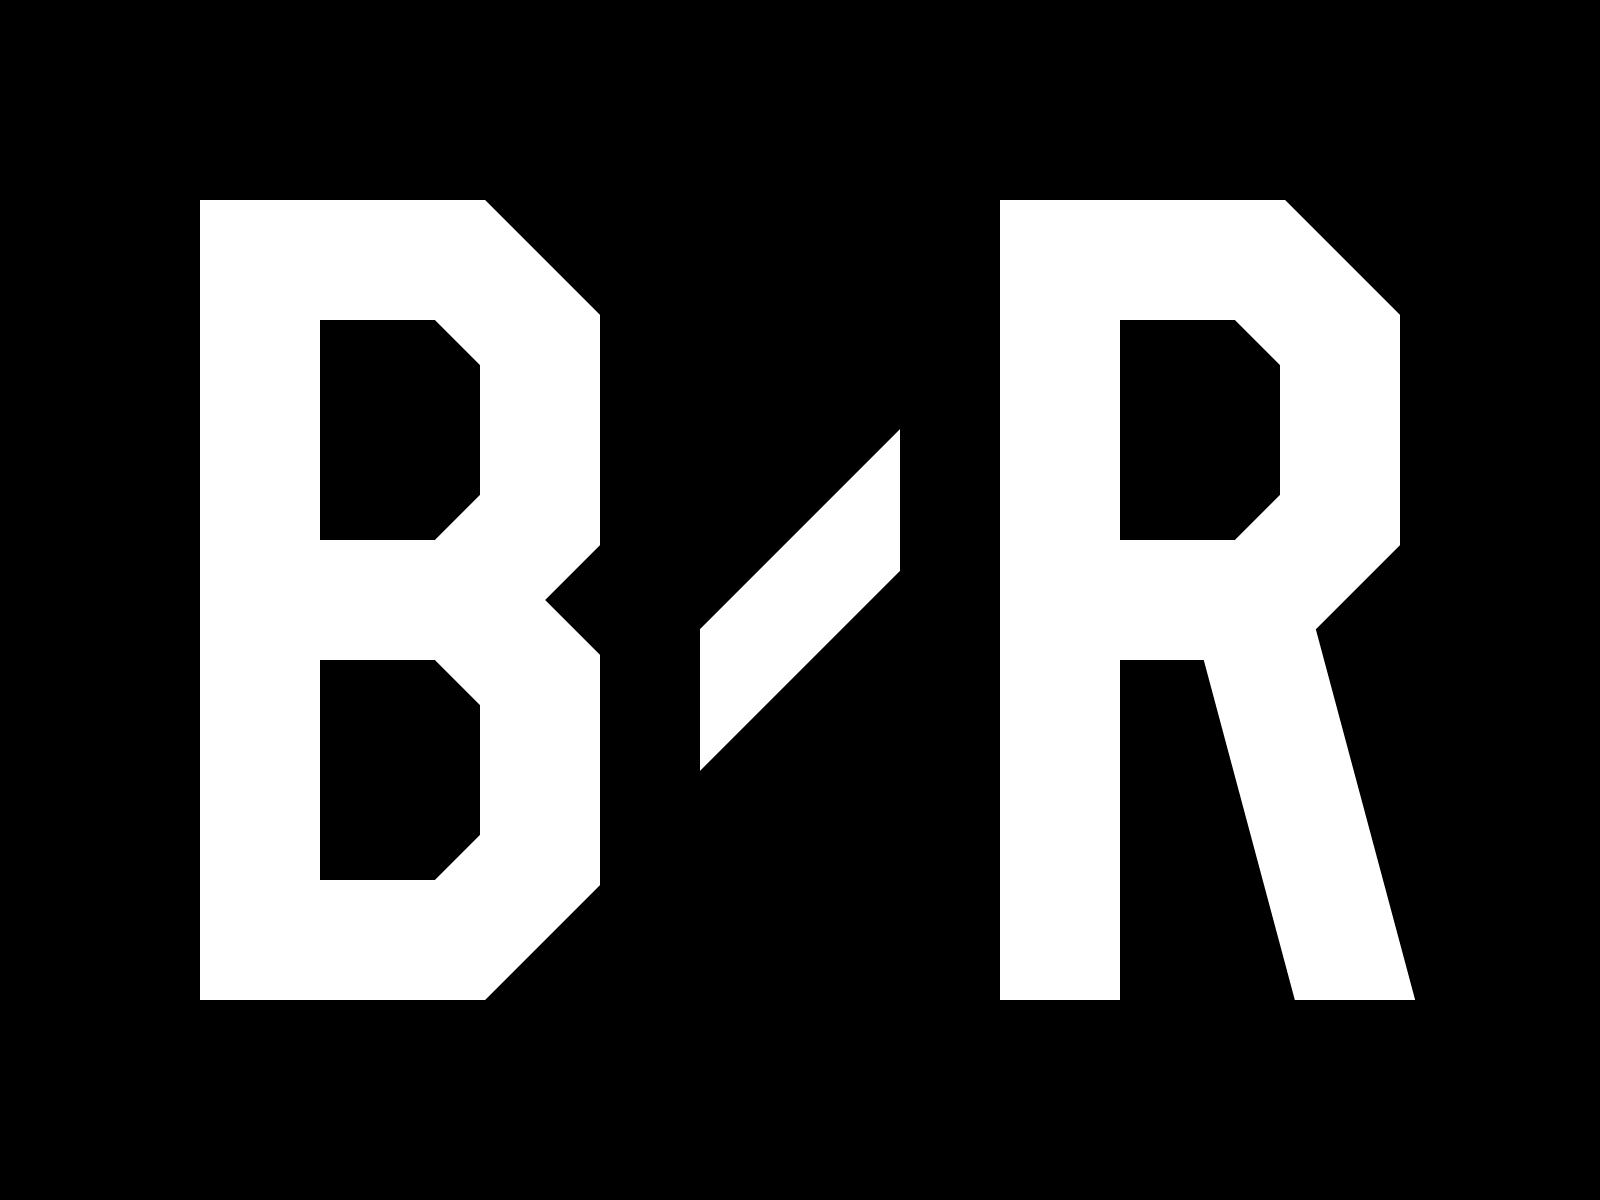 BR Logo - File:BR Logo.png - Wikimedia Commons